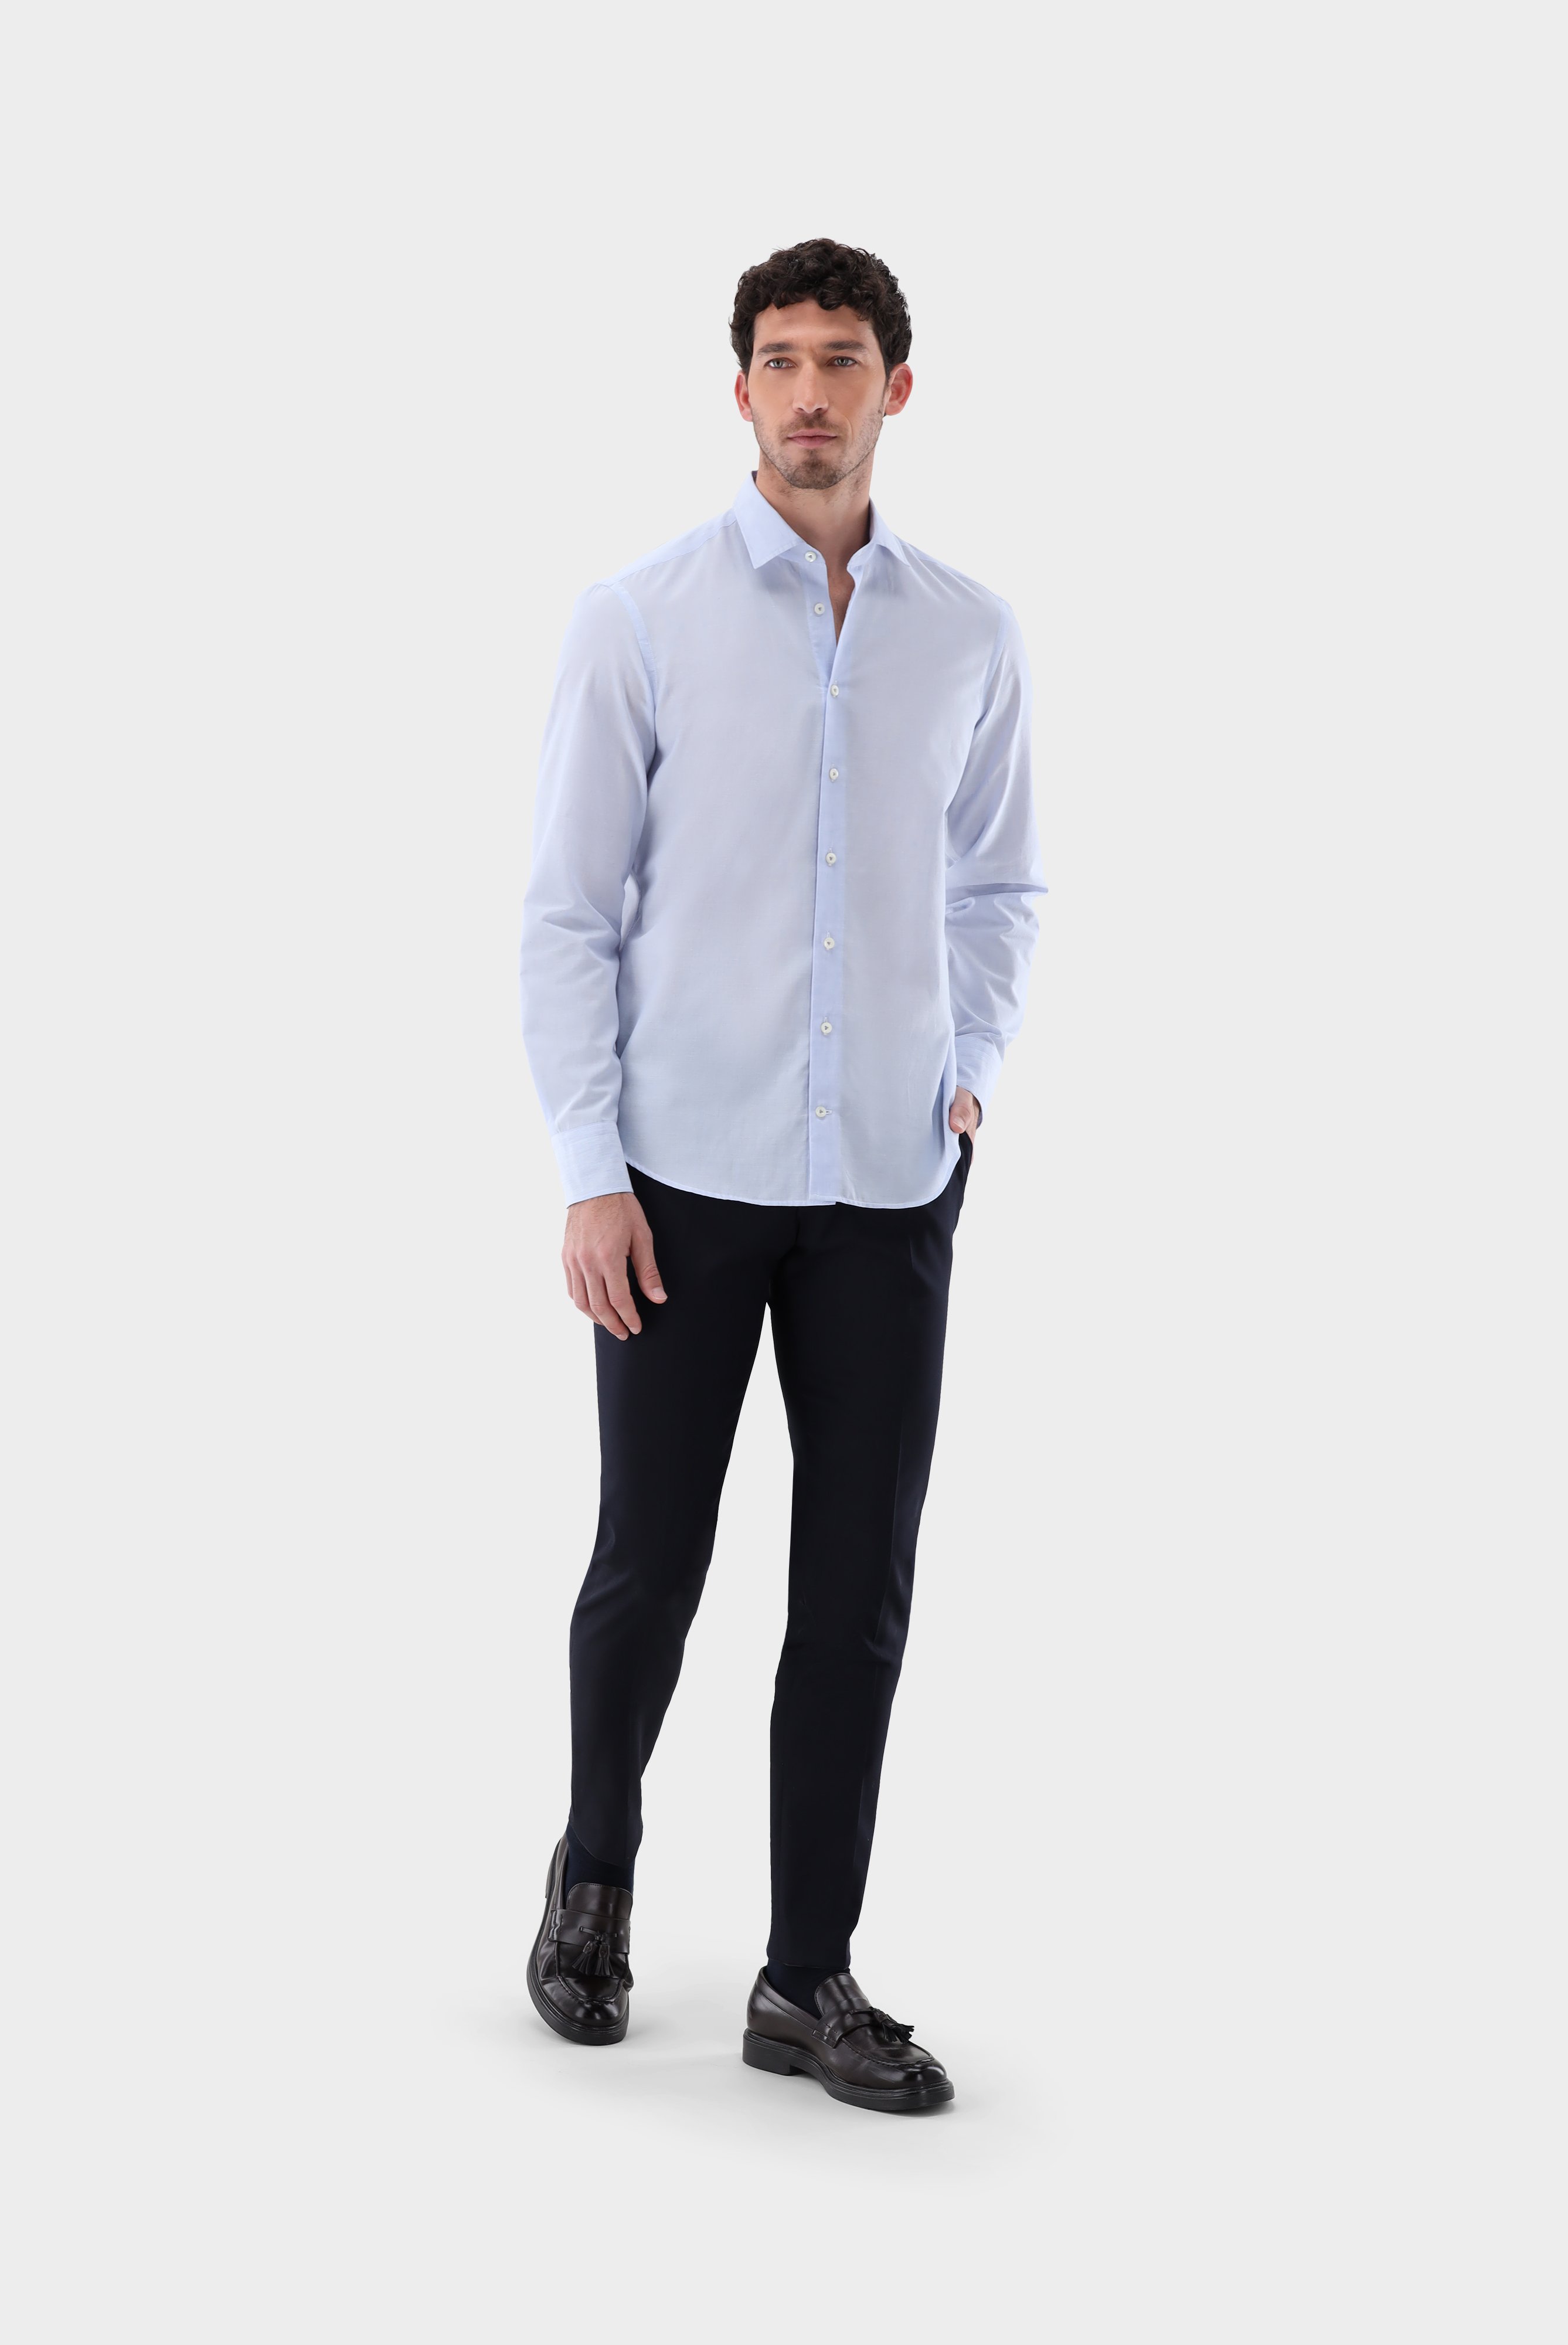 Casual Shirts+Shirt in Cotton and Linen blend Tailor Fit+20.2011.AV.151023.720.38